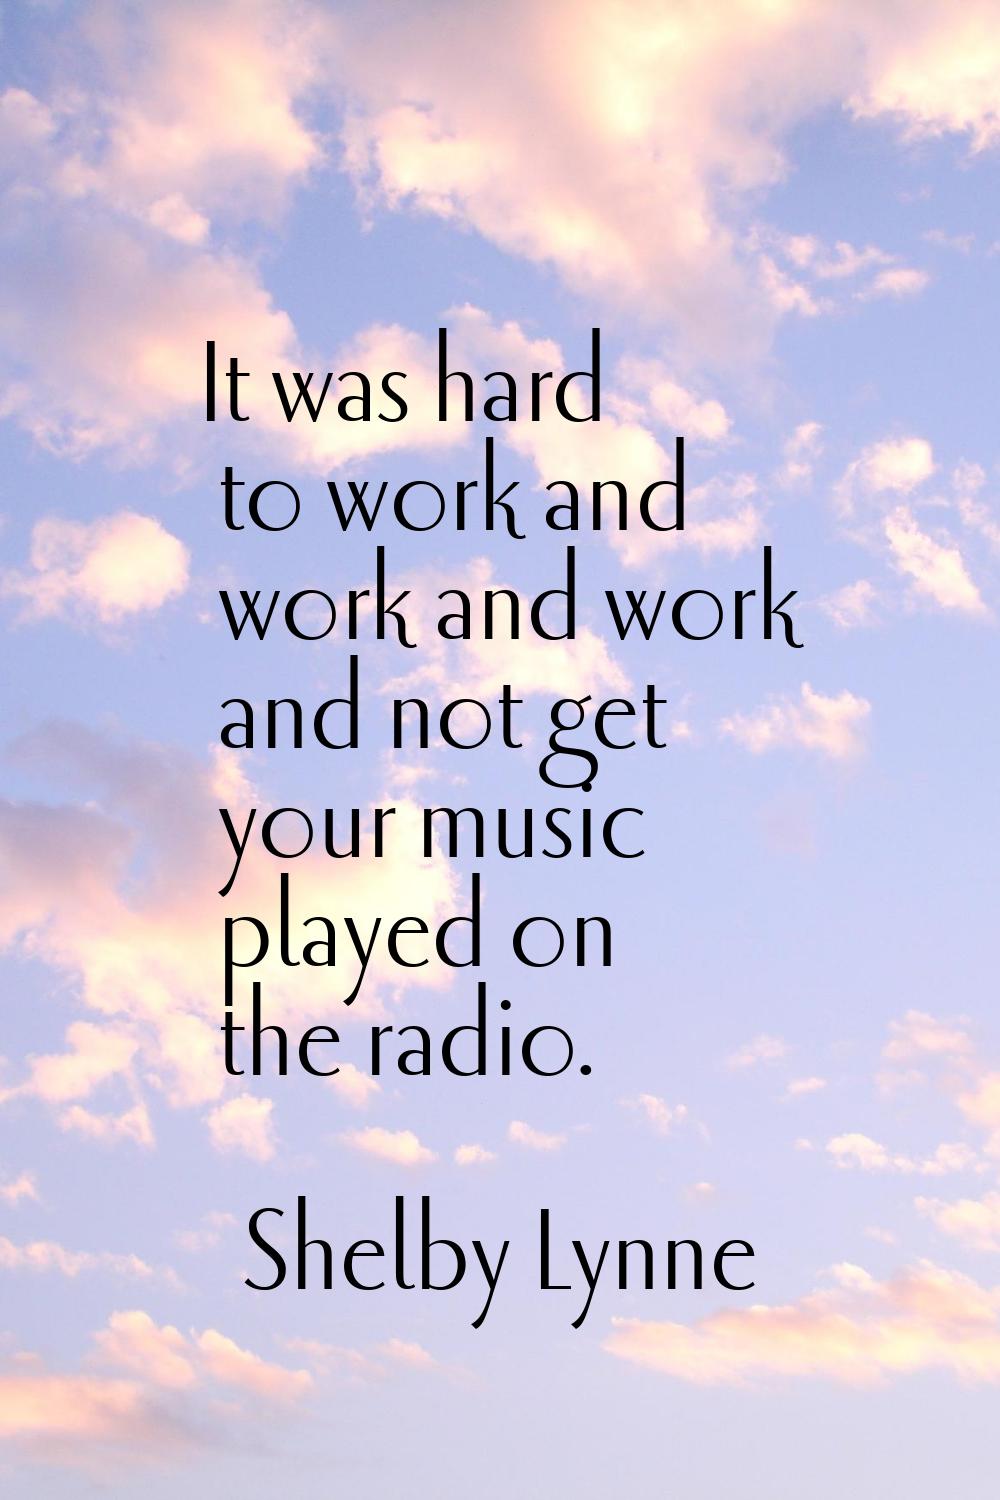 It was hard to work and work and work and not get your music played on the radio.